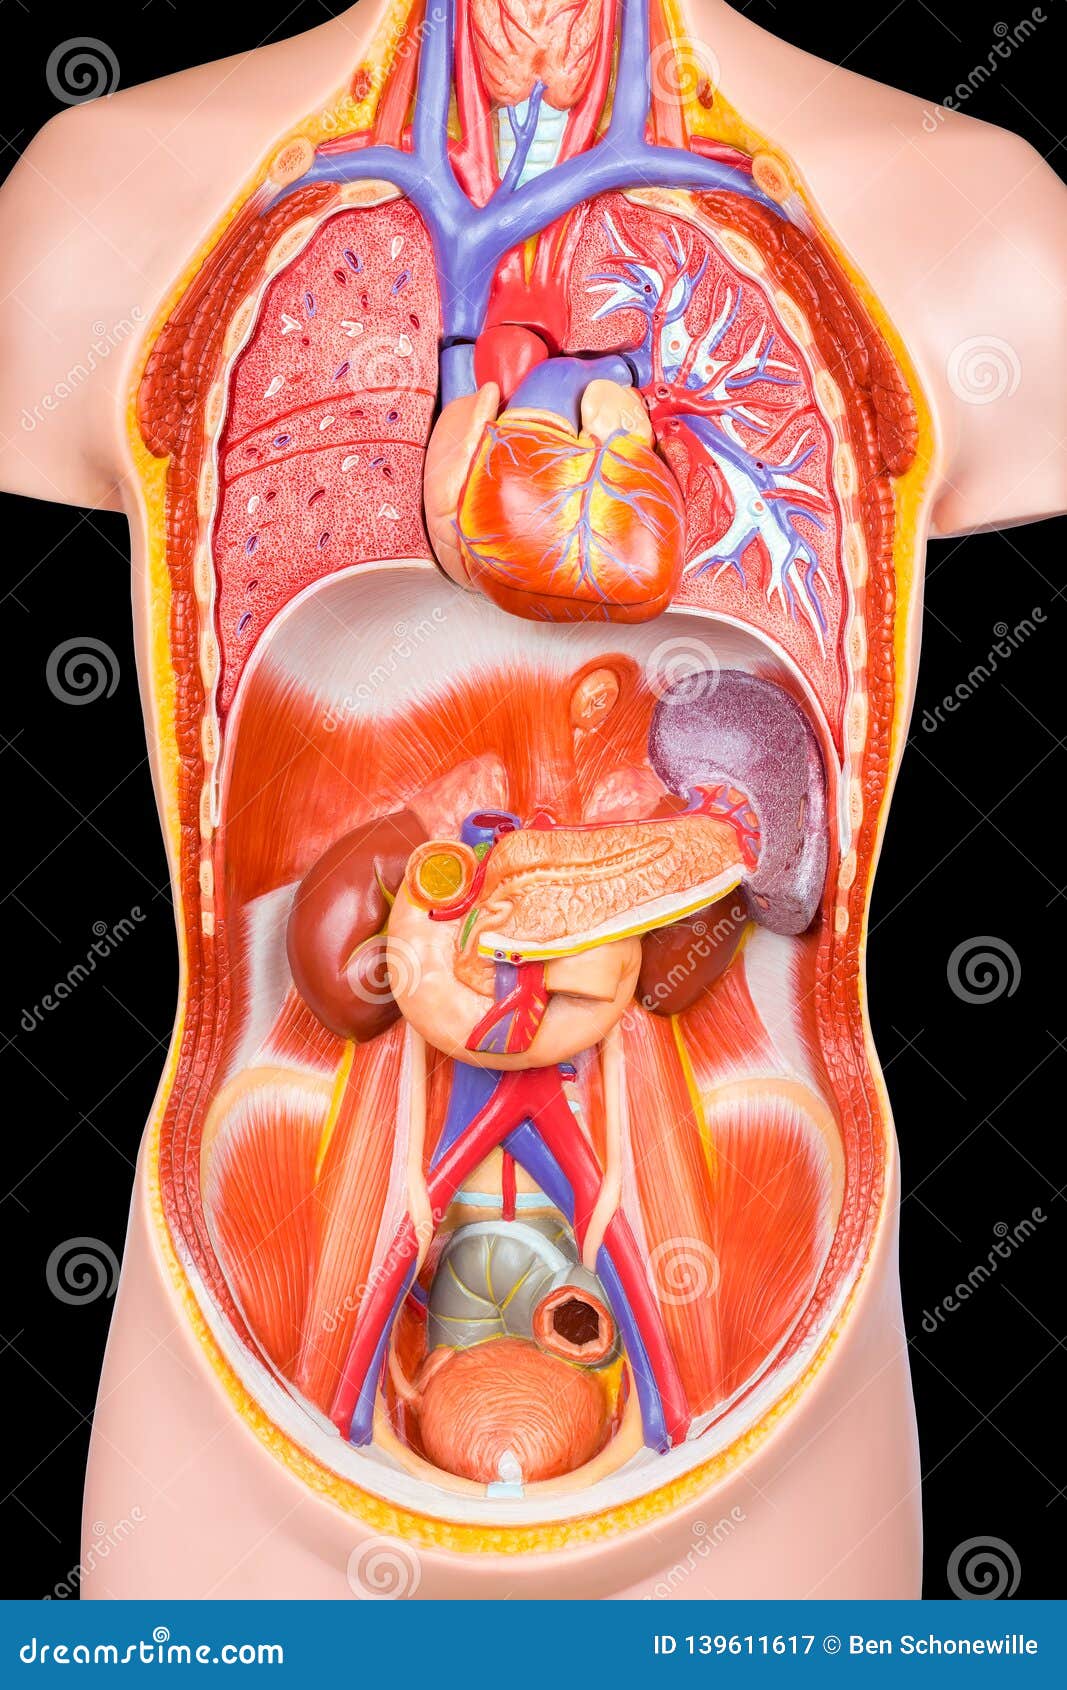 Human Internal Organs Lined With Vegetables Stock Photo ...